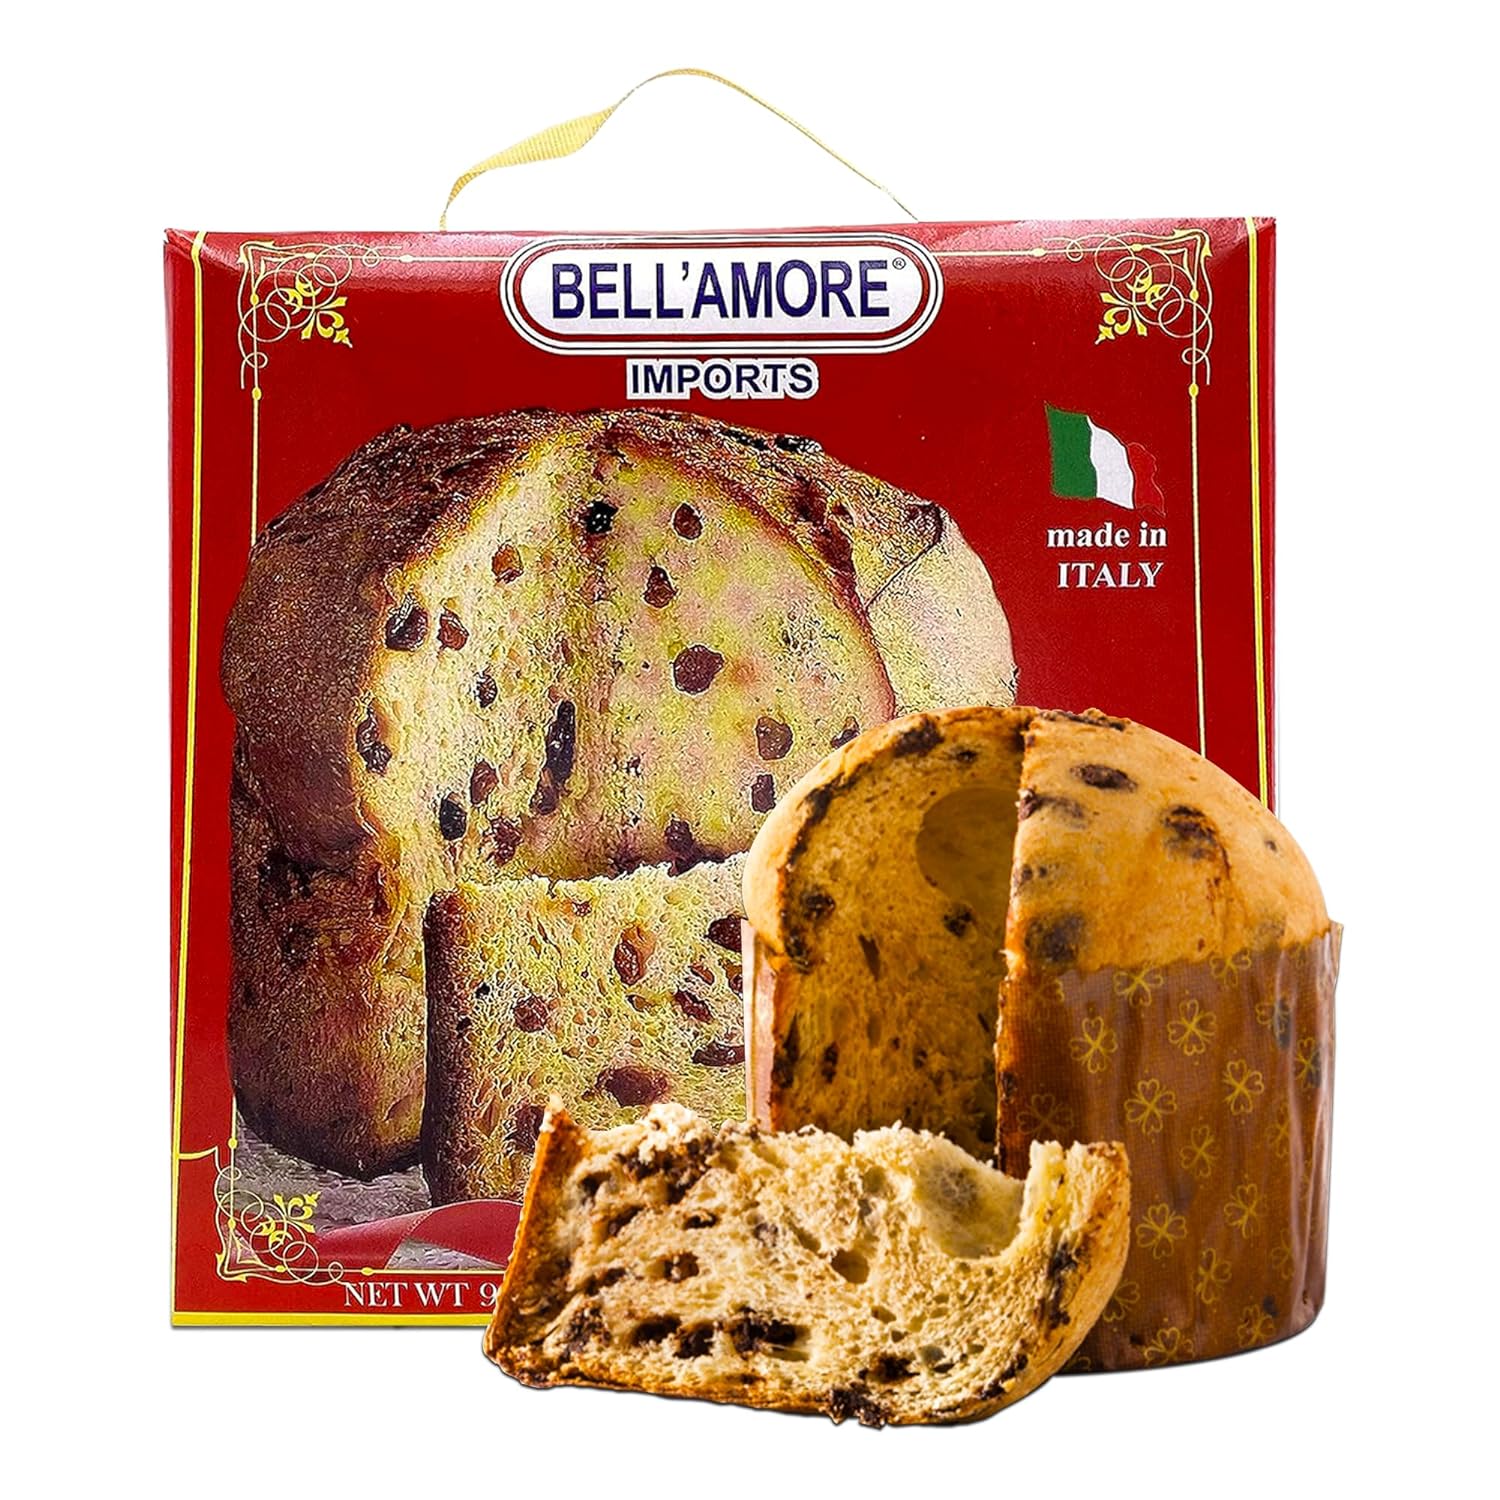 BELLAMORE PANETTONE TRADITIONAL (RED) 12/2LB